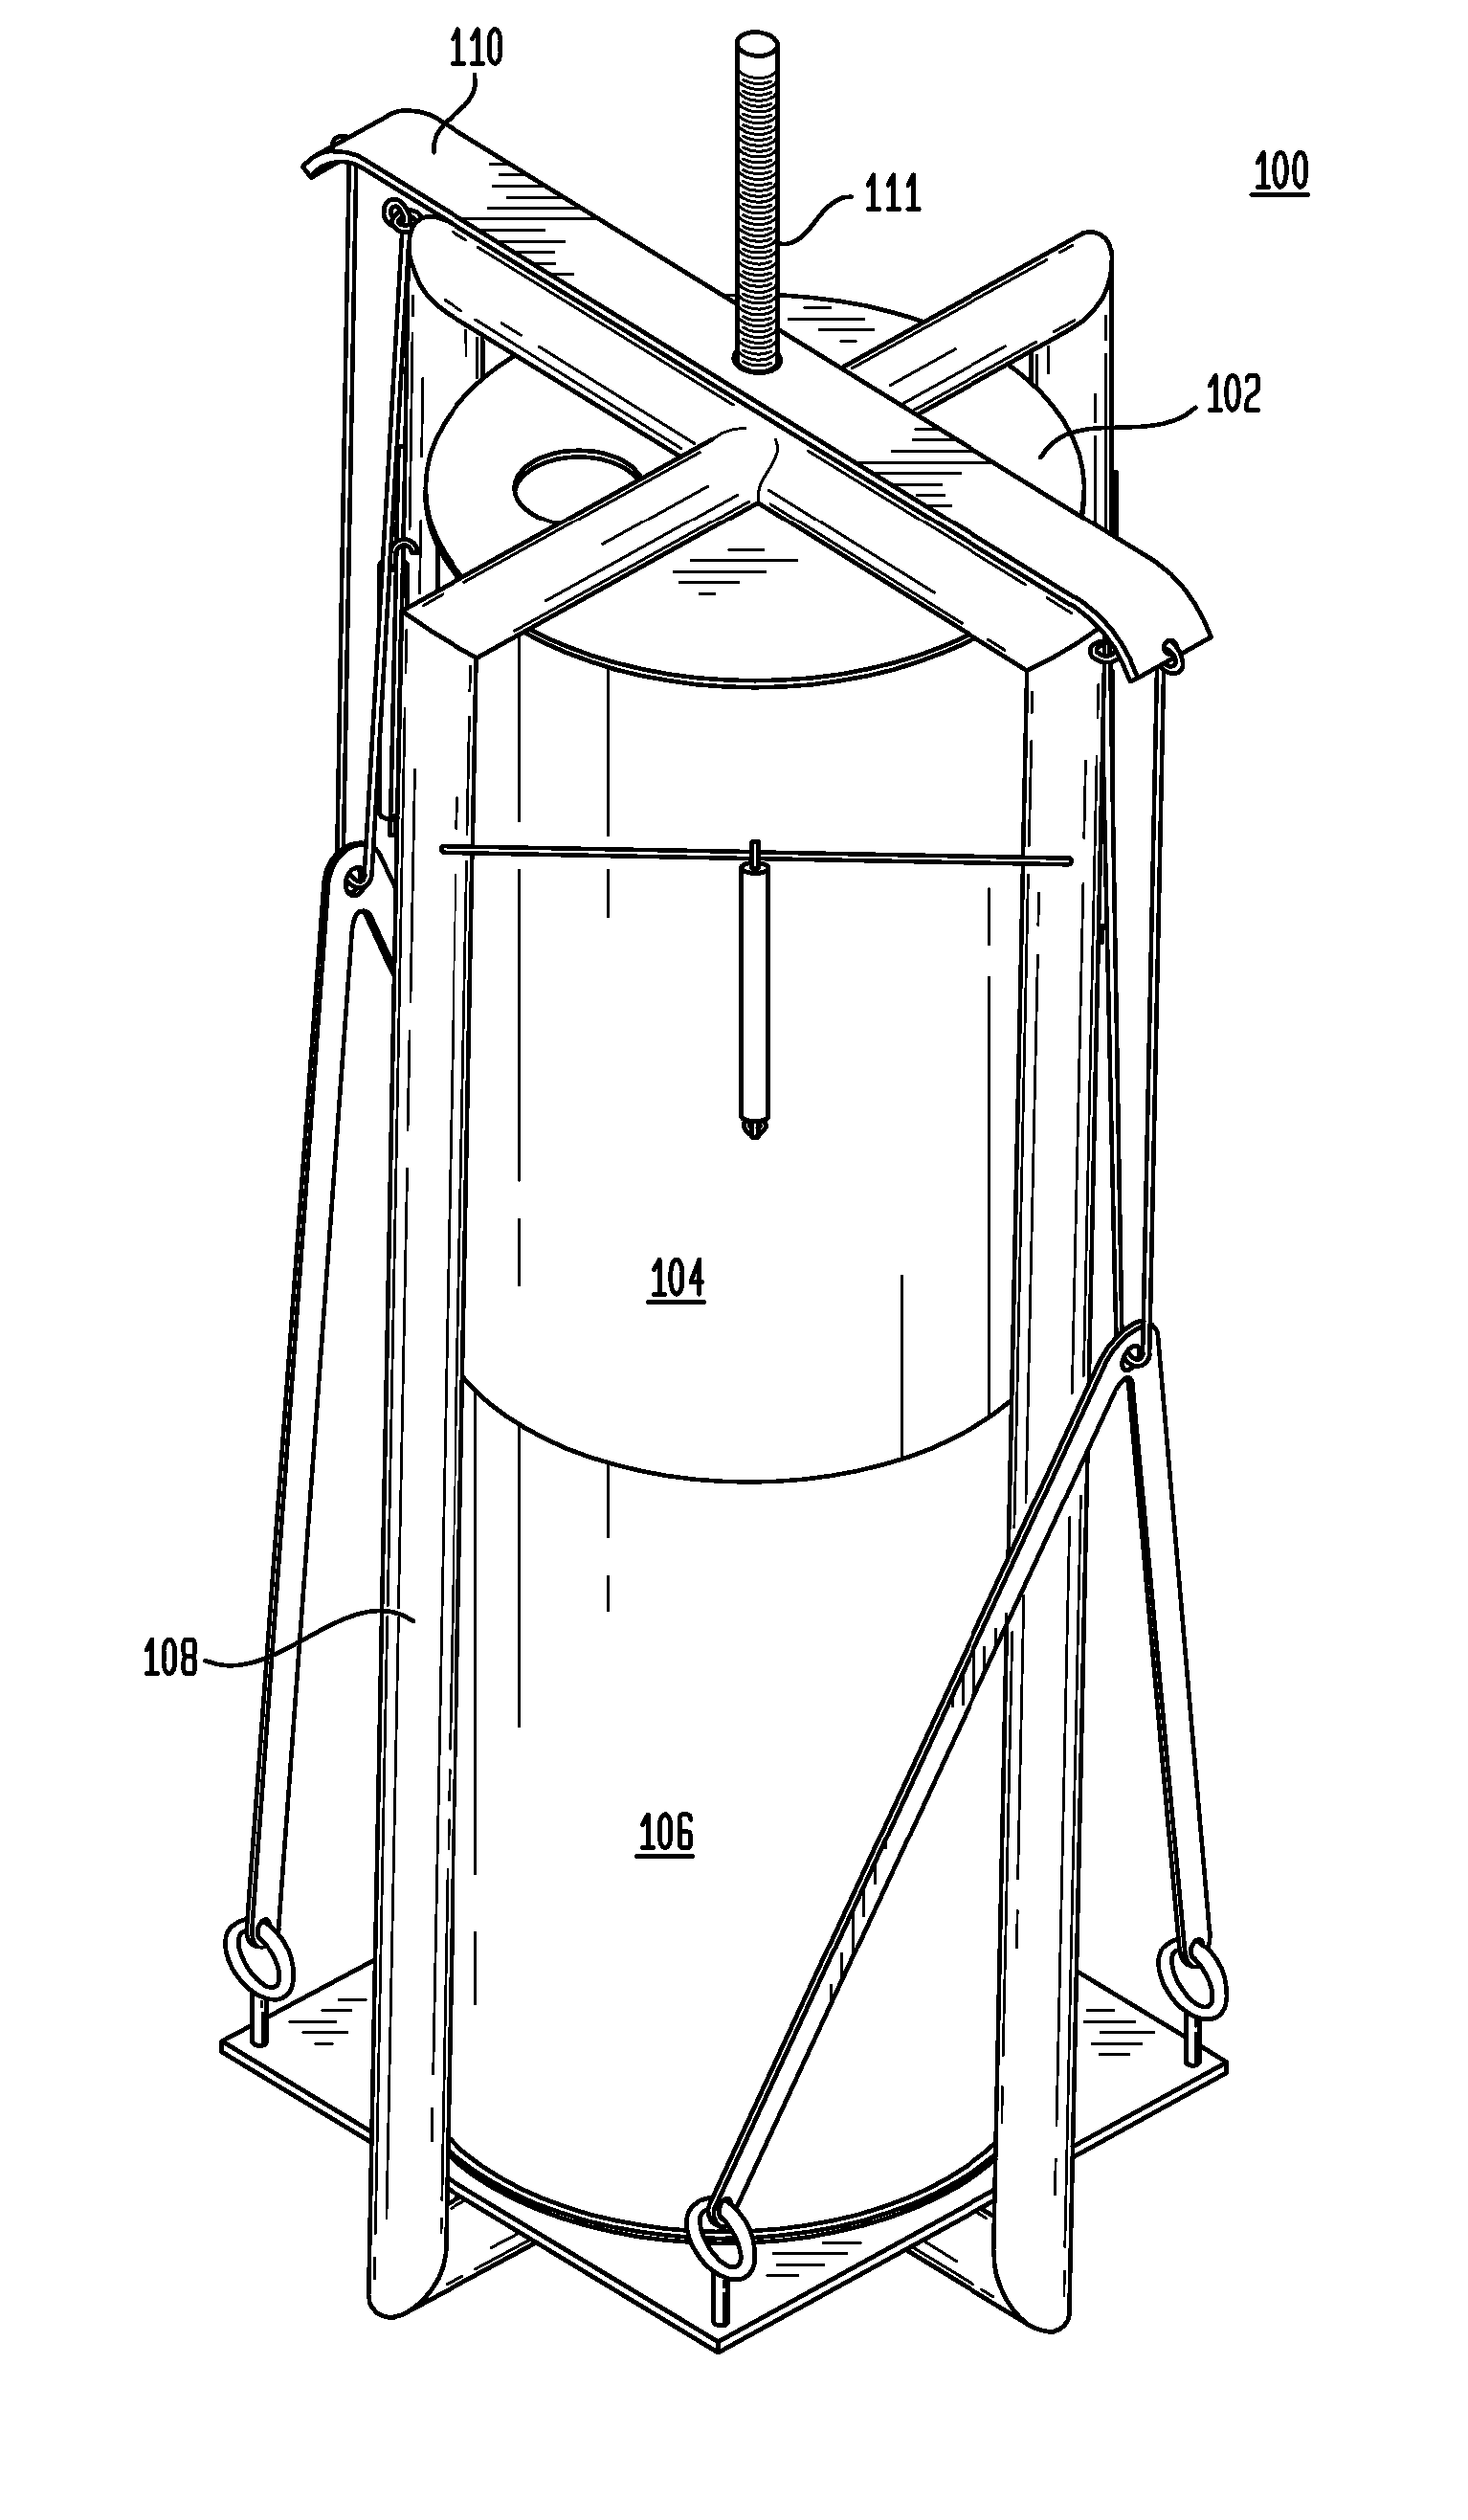 Systems and methods using gravity and buoyancy for producing energy